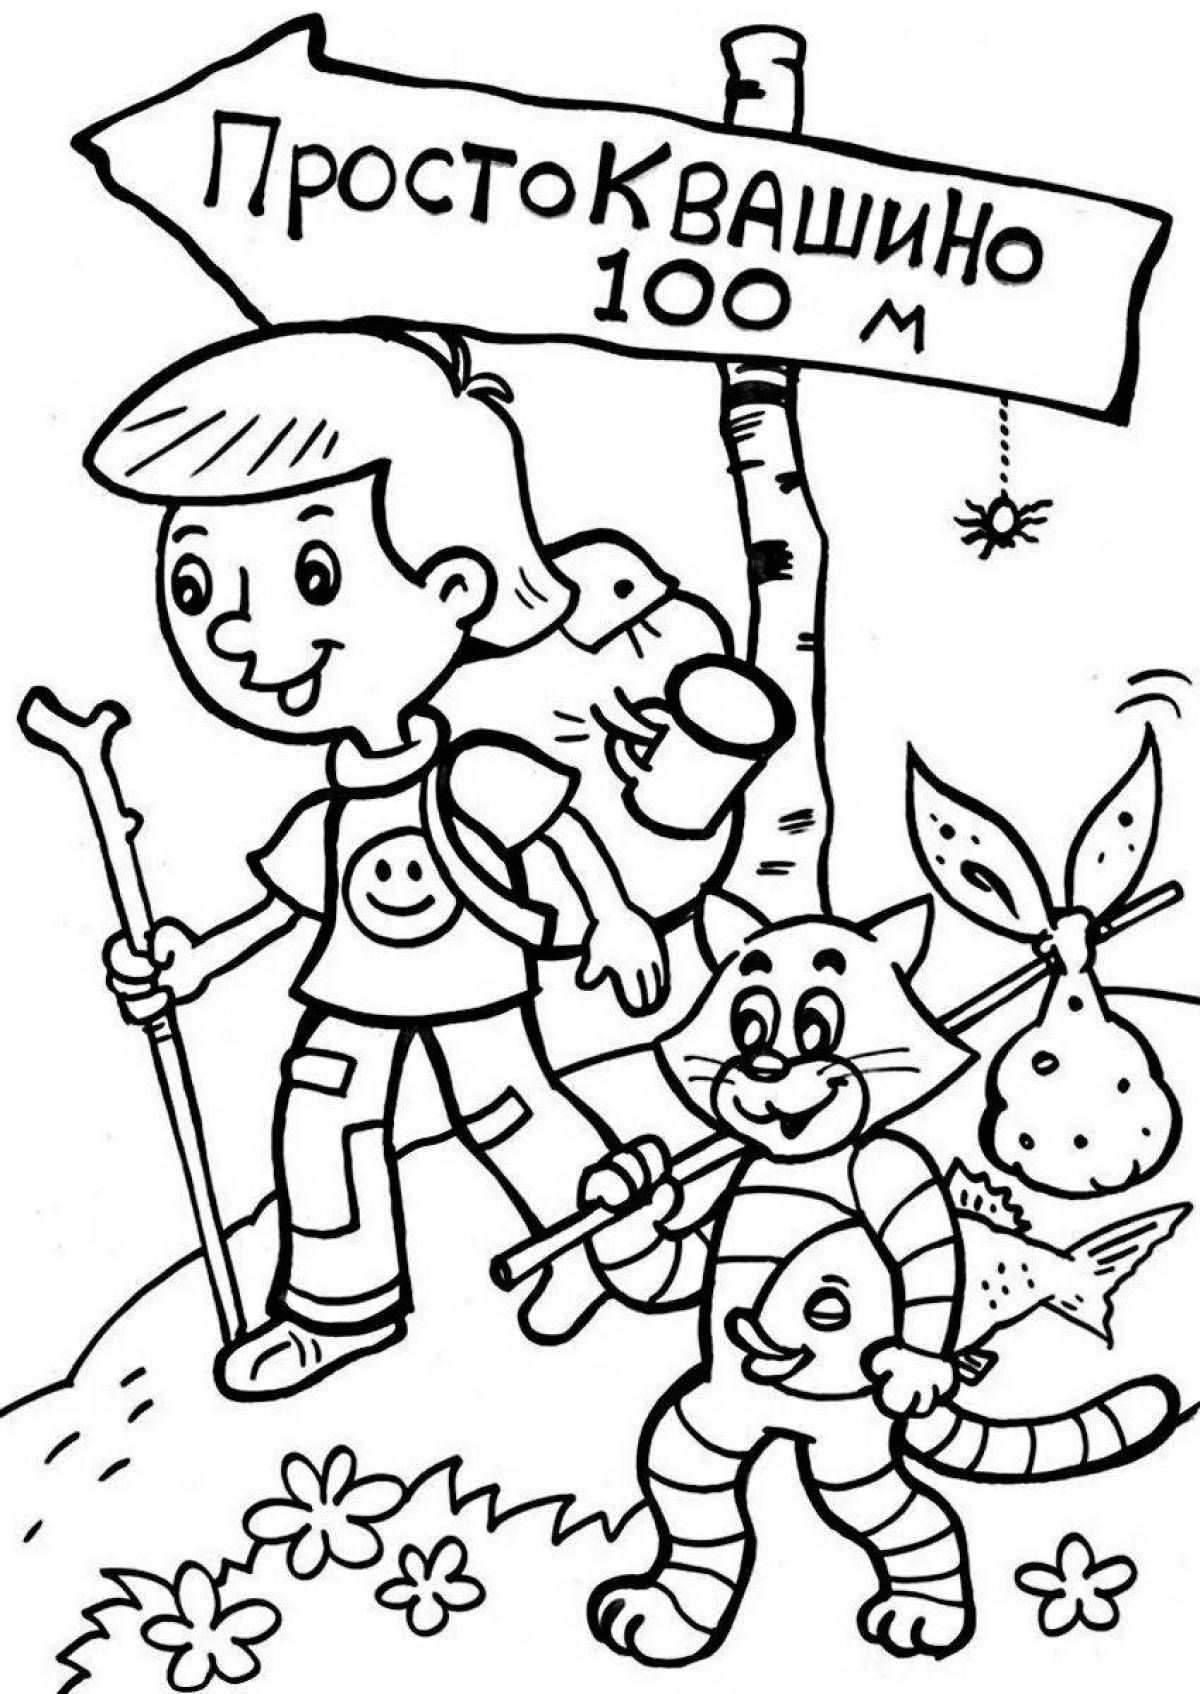 Incredible sailor skin coloring page for toddlers